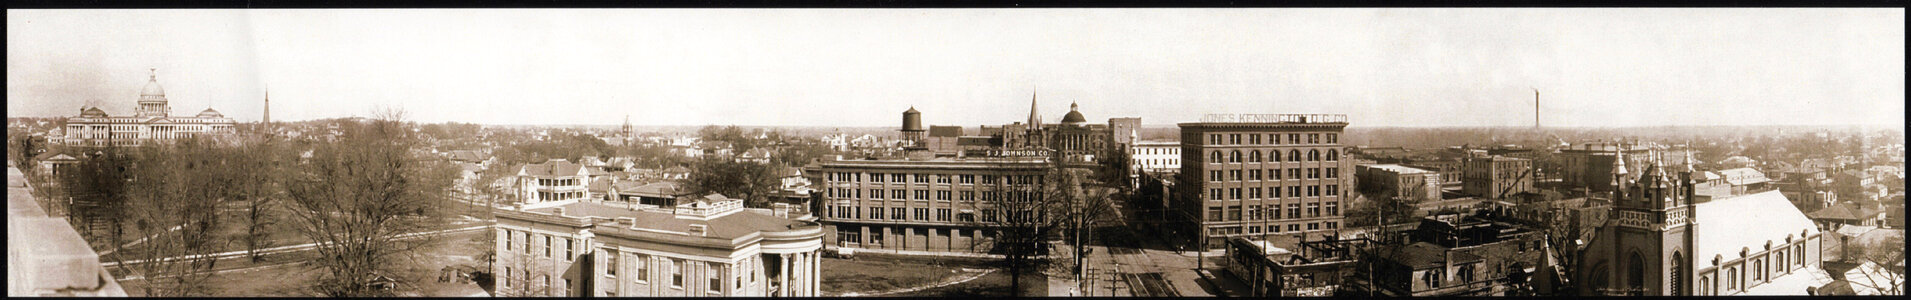 Panorama of downtown Jackson in 1910 in Mississippi